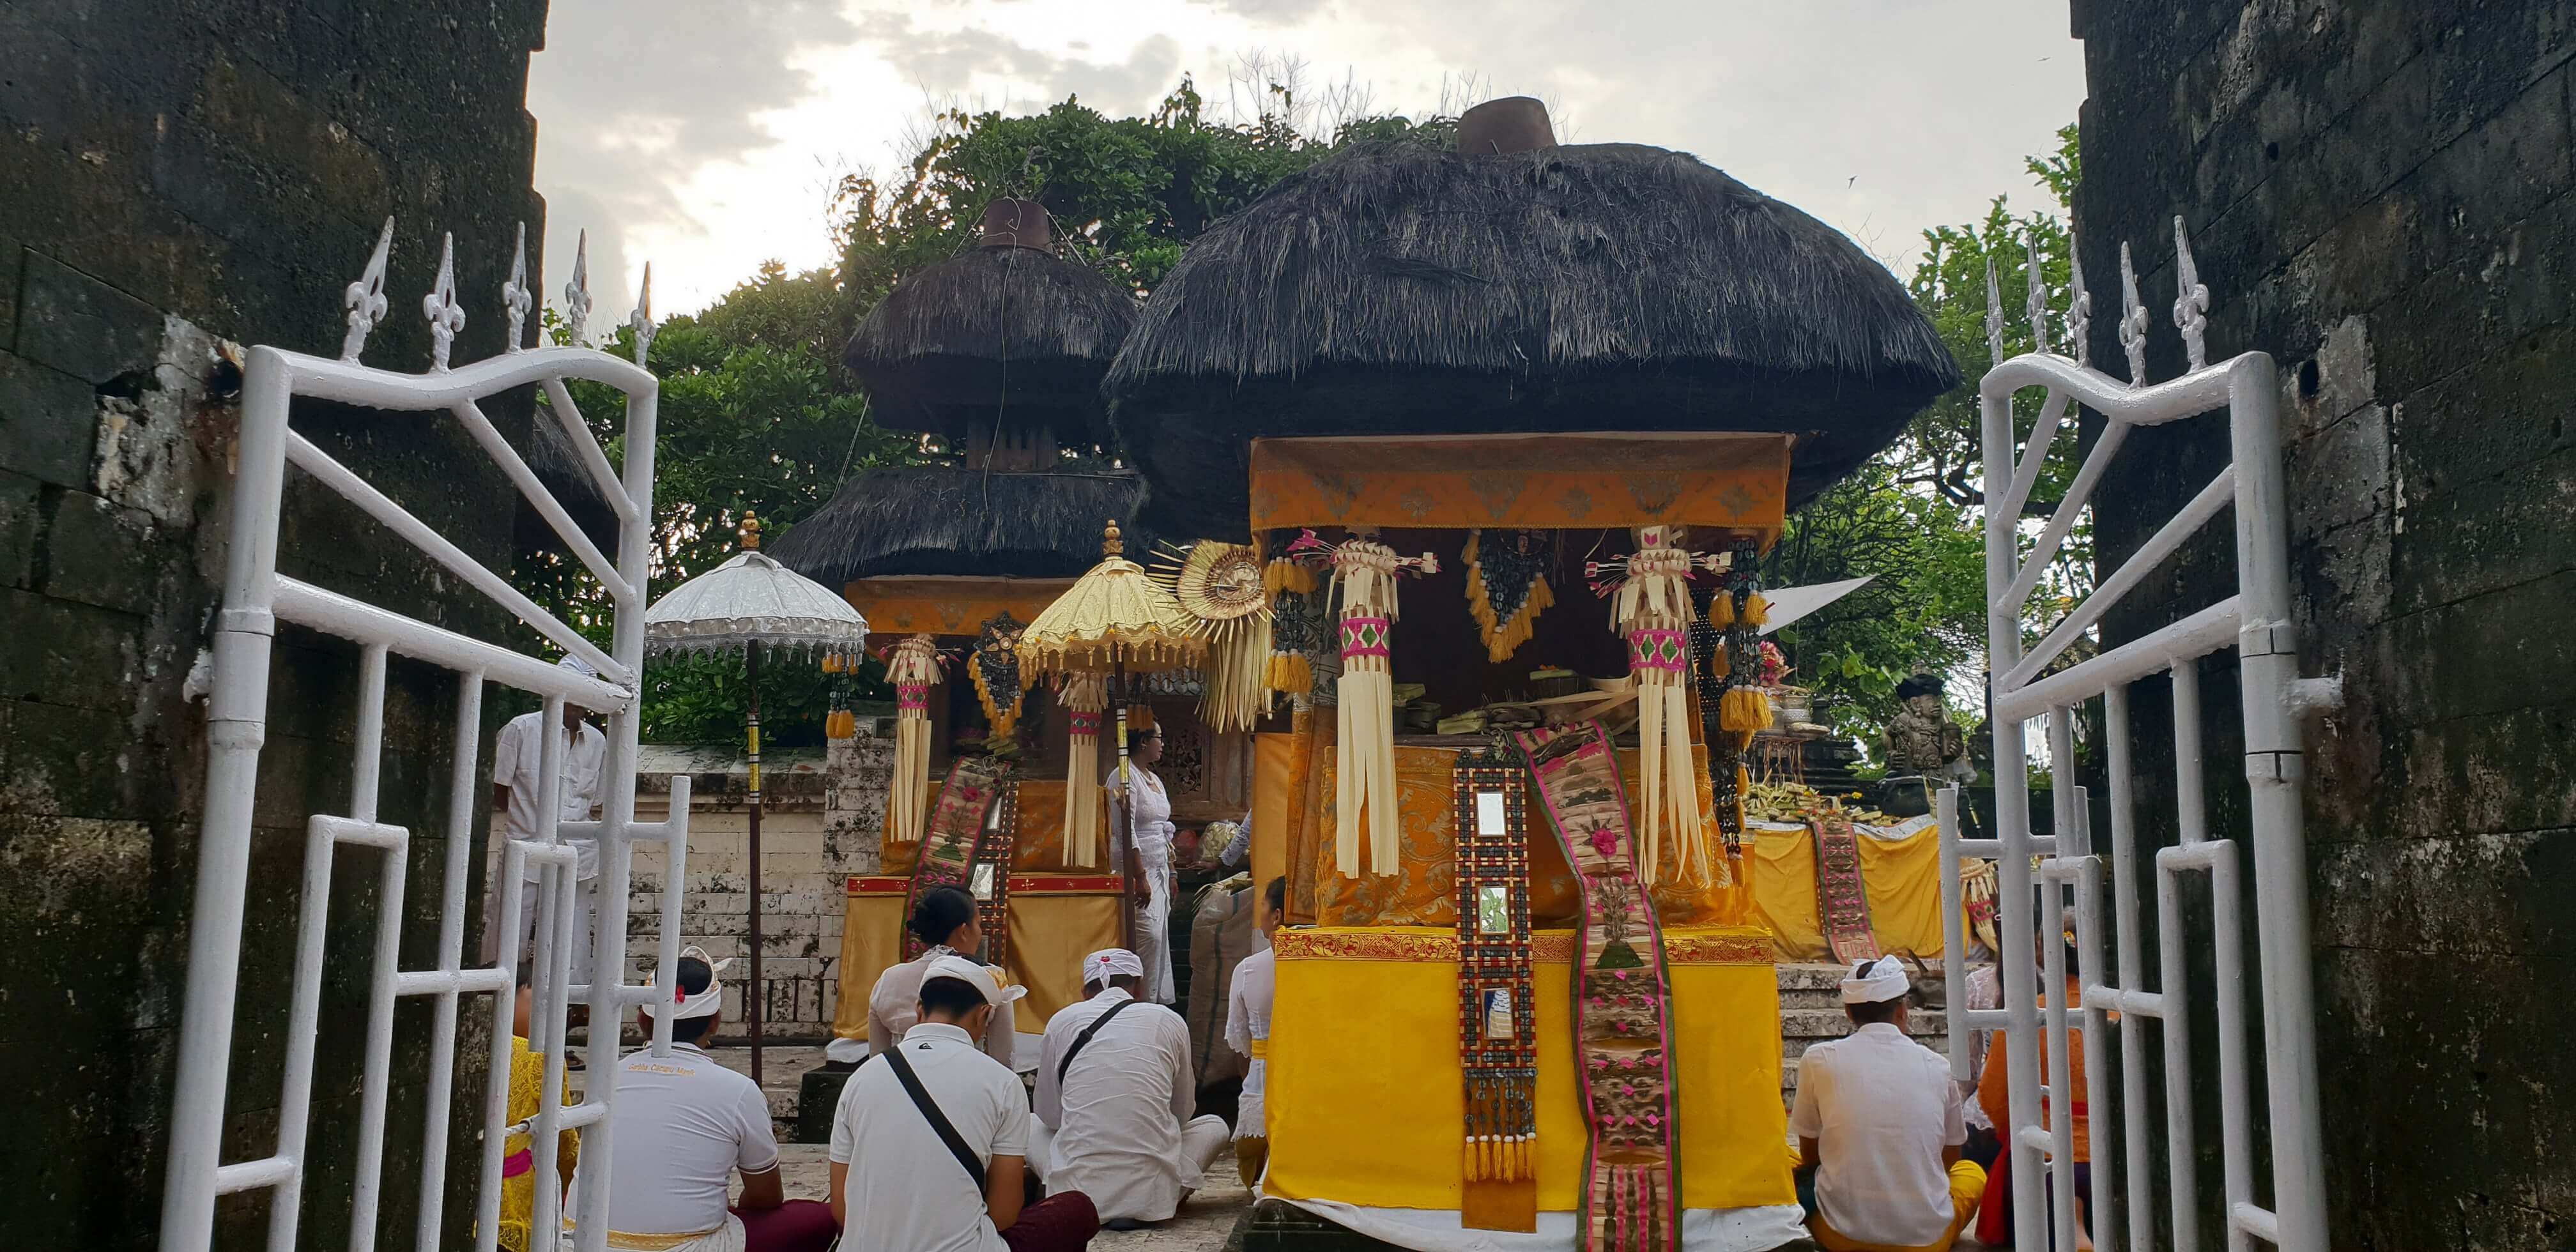 A view of the Hindu ceremony happening inside the Uluwatu temple